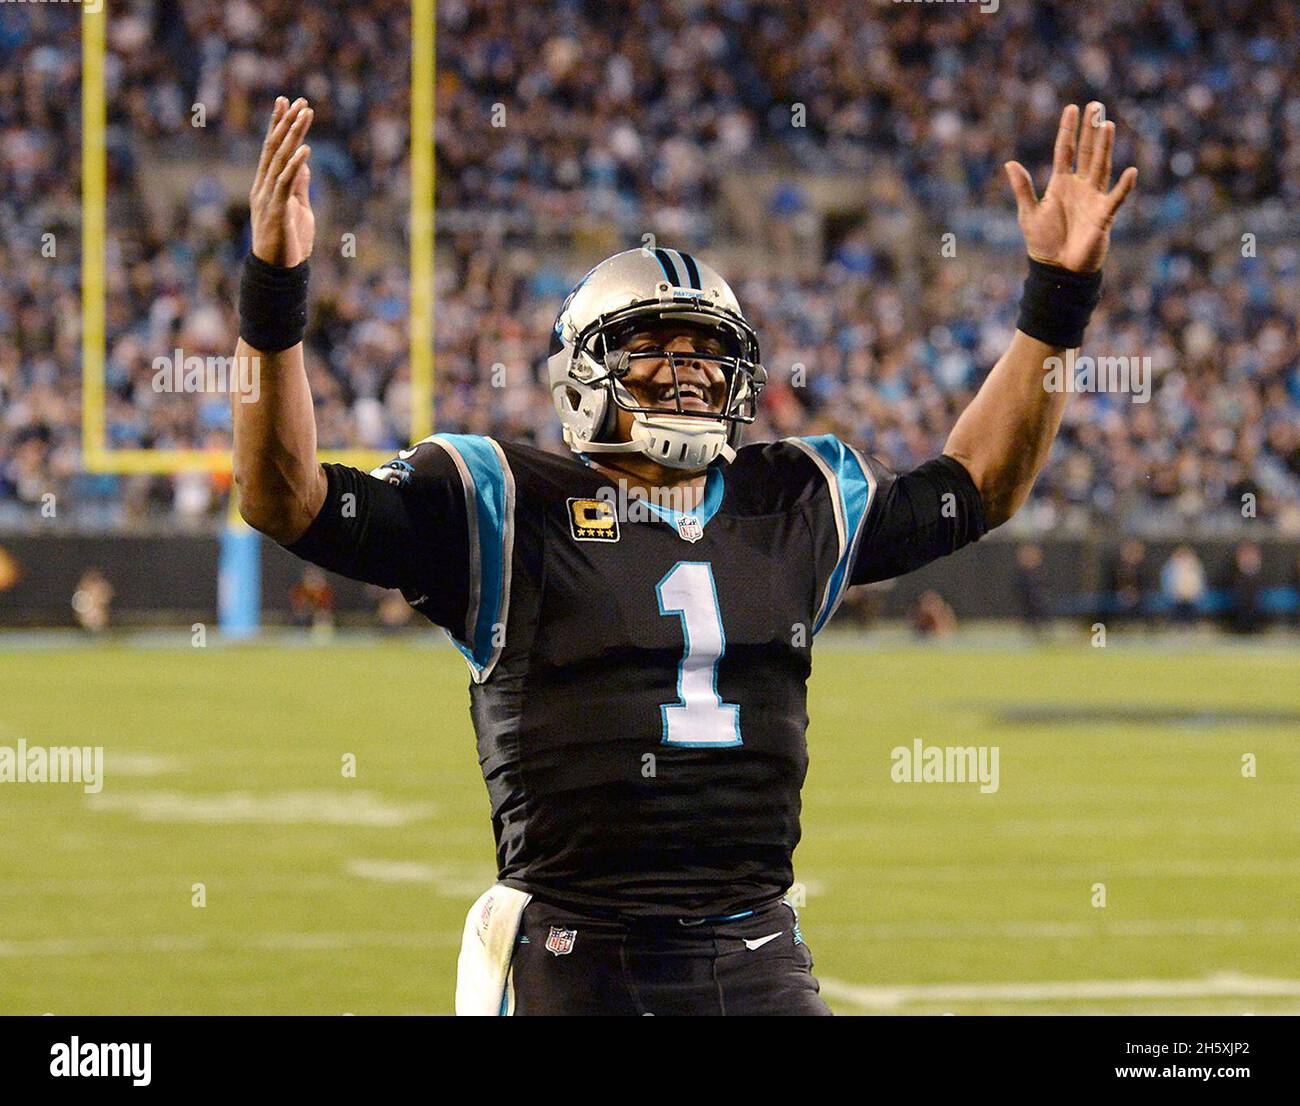 Charlotte, USA. 17th Dec, 2018. Carolina Panthers quarterback Cam Newton celebrates tight end Chris Manhertz's 50-yard touchdown pass reception from running back Christian McCaffrey during the first quarter against the New Orleans Saints at Bank of America Stadium in Charlotte, N.C., on Monday, Dec. 17, 2018. (Photo by Jeff Siner/Charlotte Observer/TNS/Sipa USA) Credit: Sipa USA/Alamy Live News Stock Photo